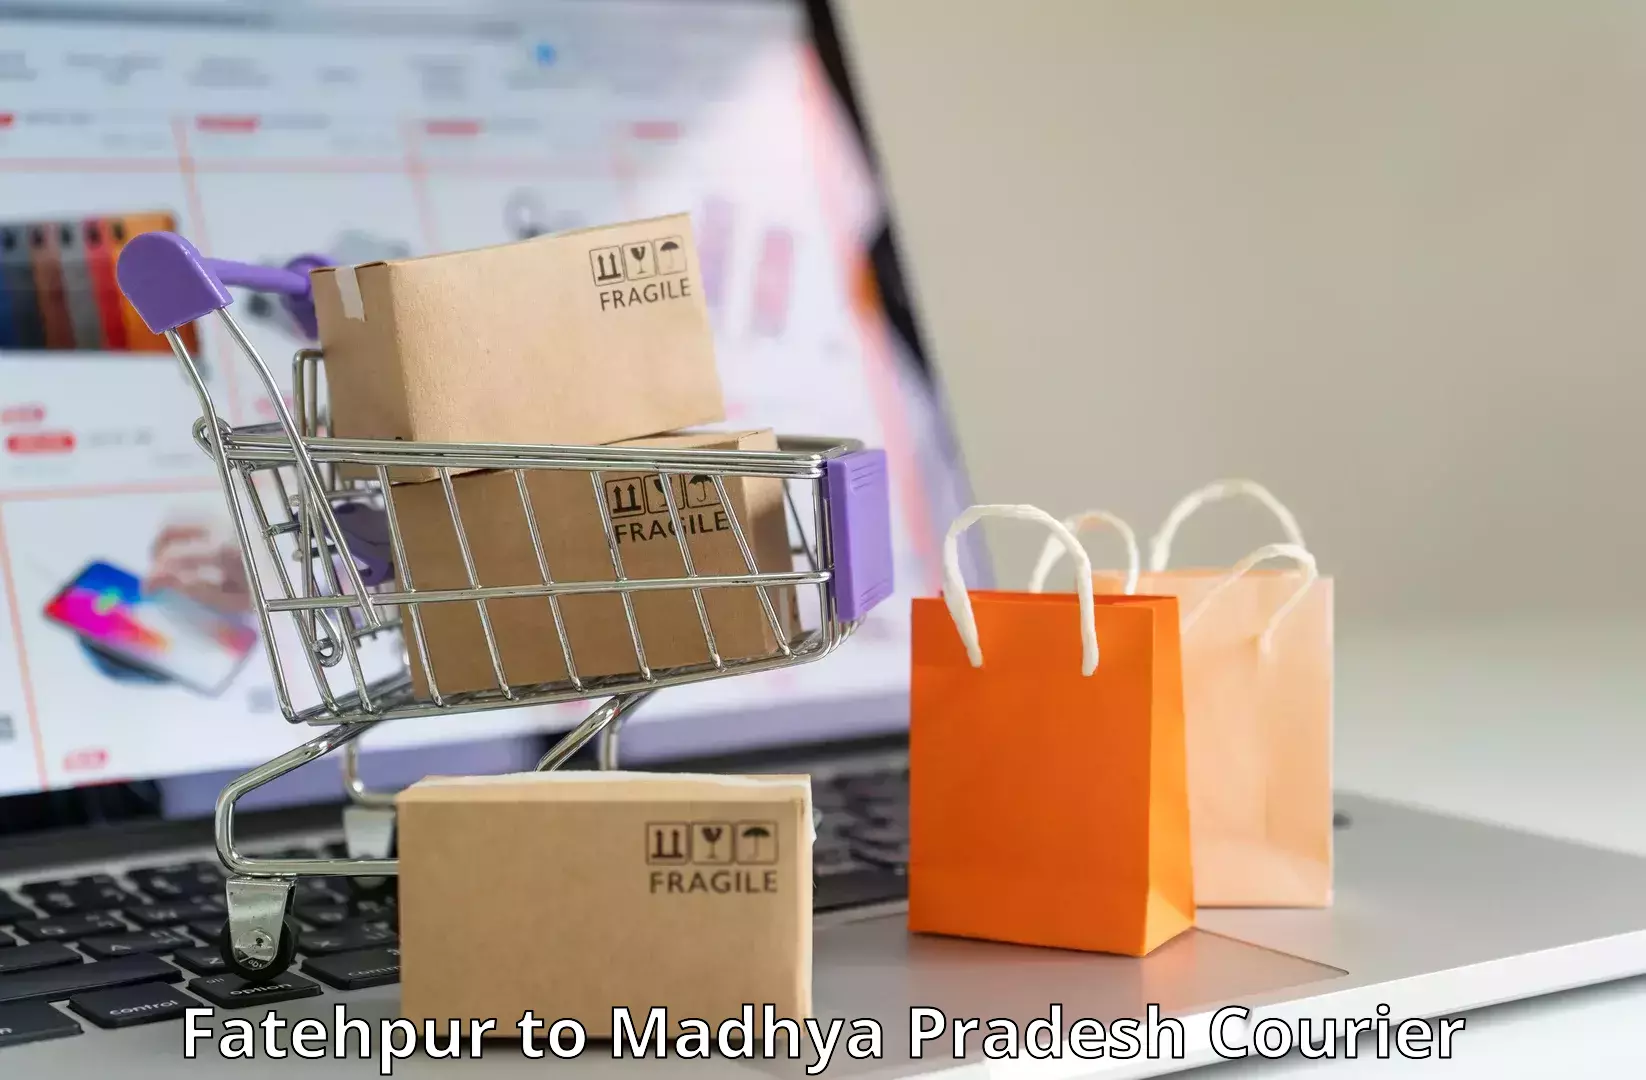 Bulk courier orders Fatehpur to Sidhi